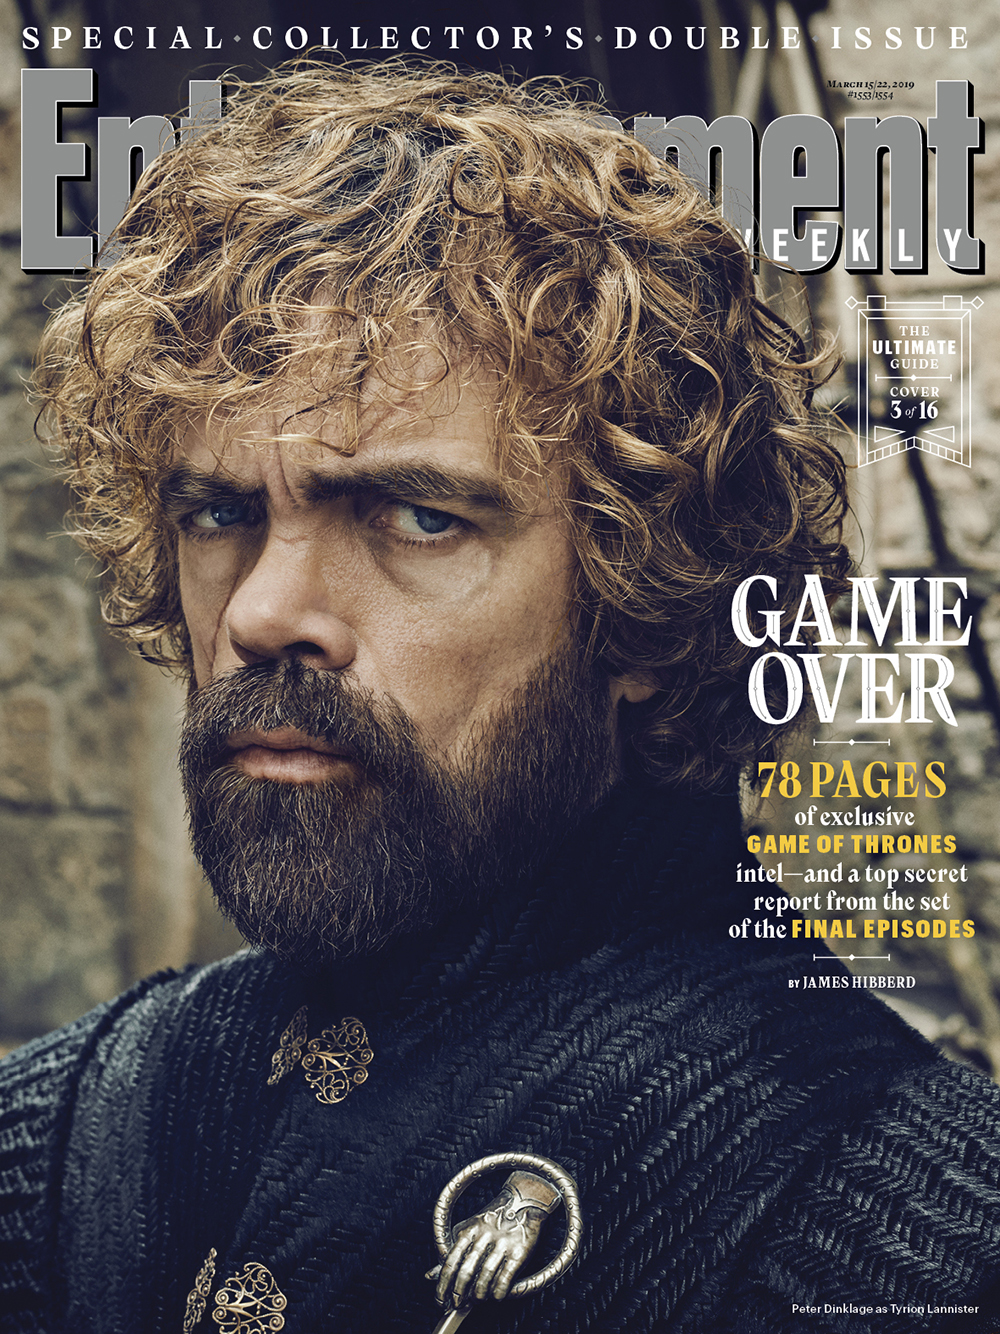 Entertainment Weekly S Game Of Thrones Issue With Executive Editor